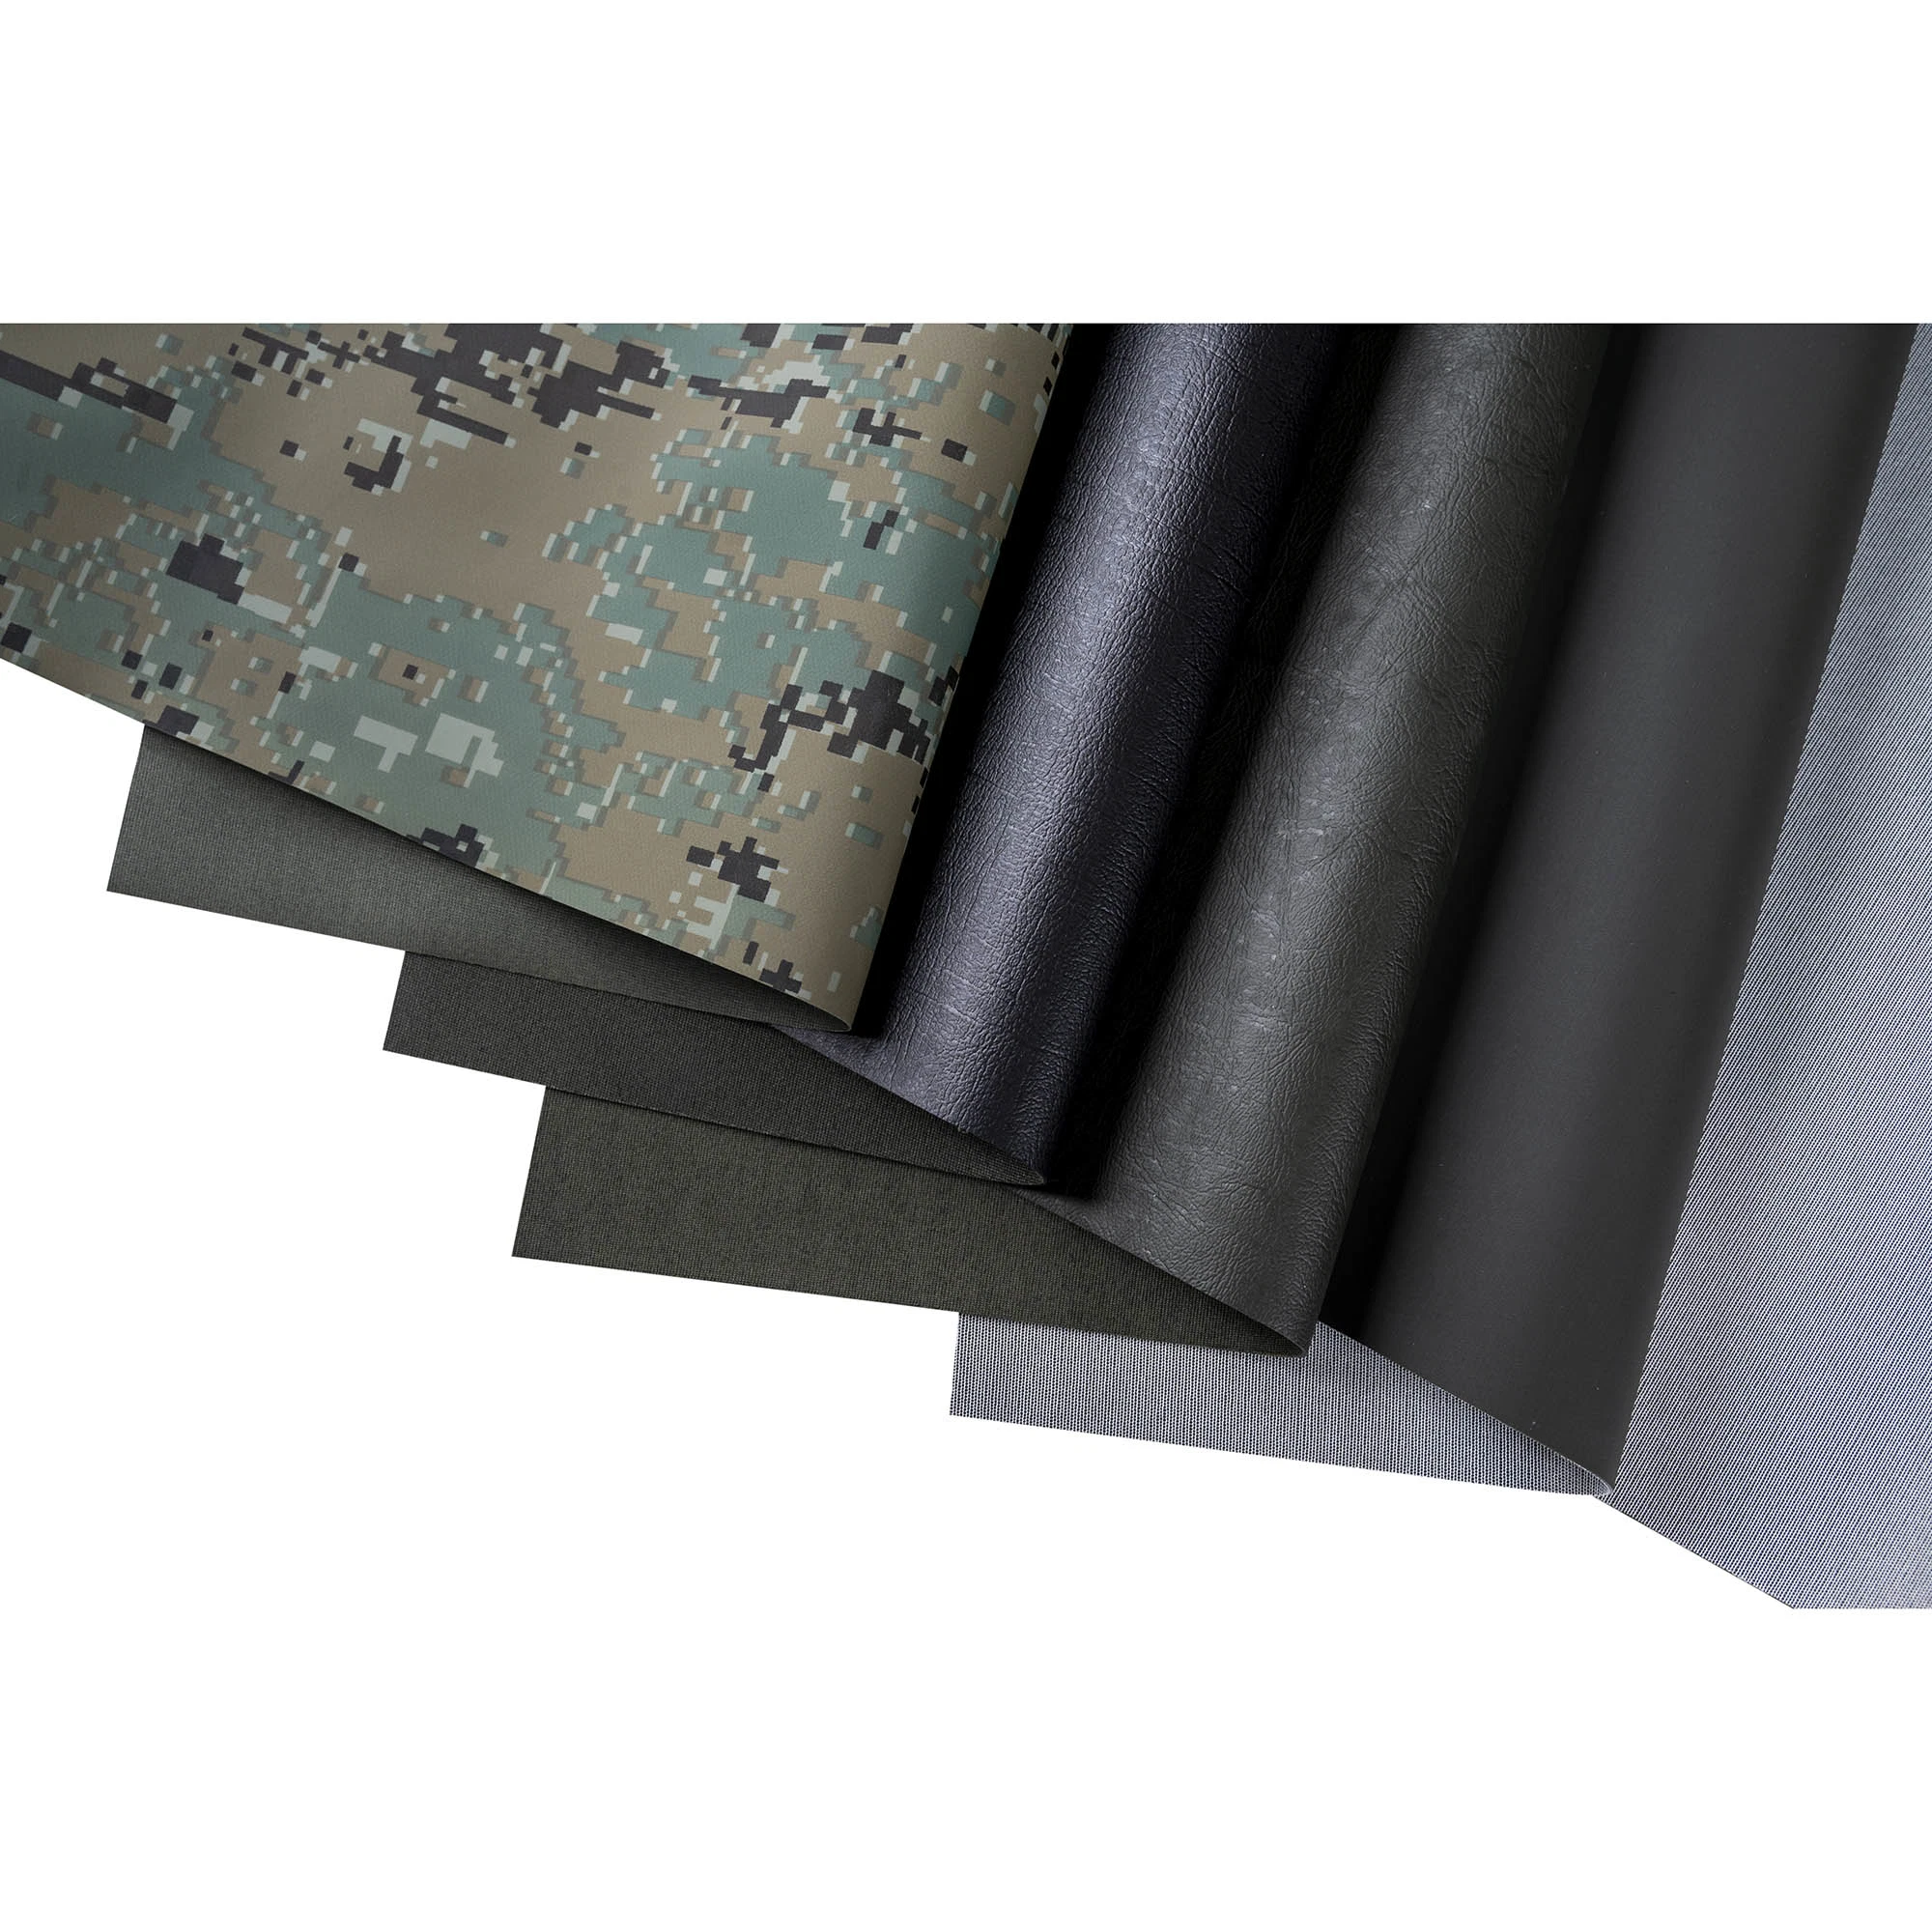 Sijia High Quality PVC Material for Wader Clothes of PVC Coated Fabric Camouflage Nylon PVC